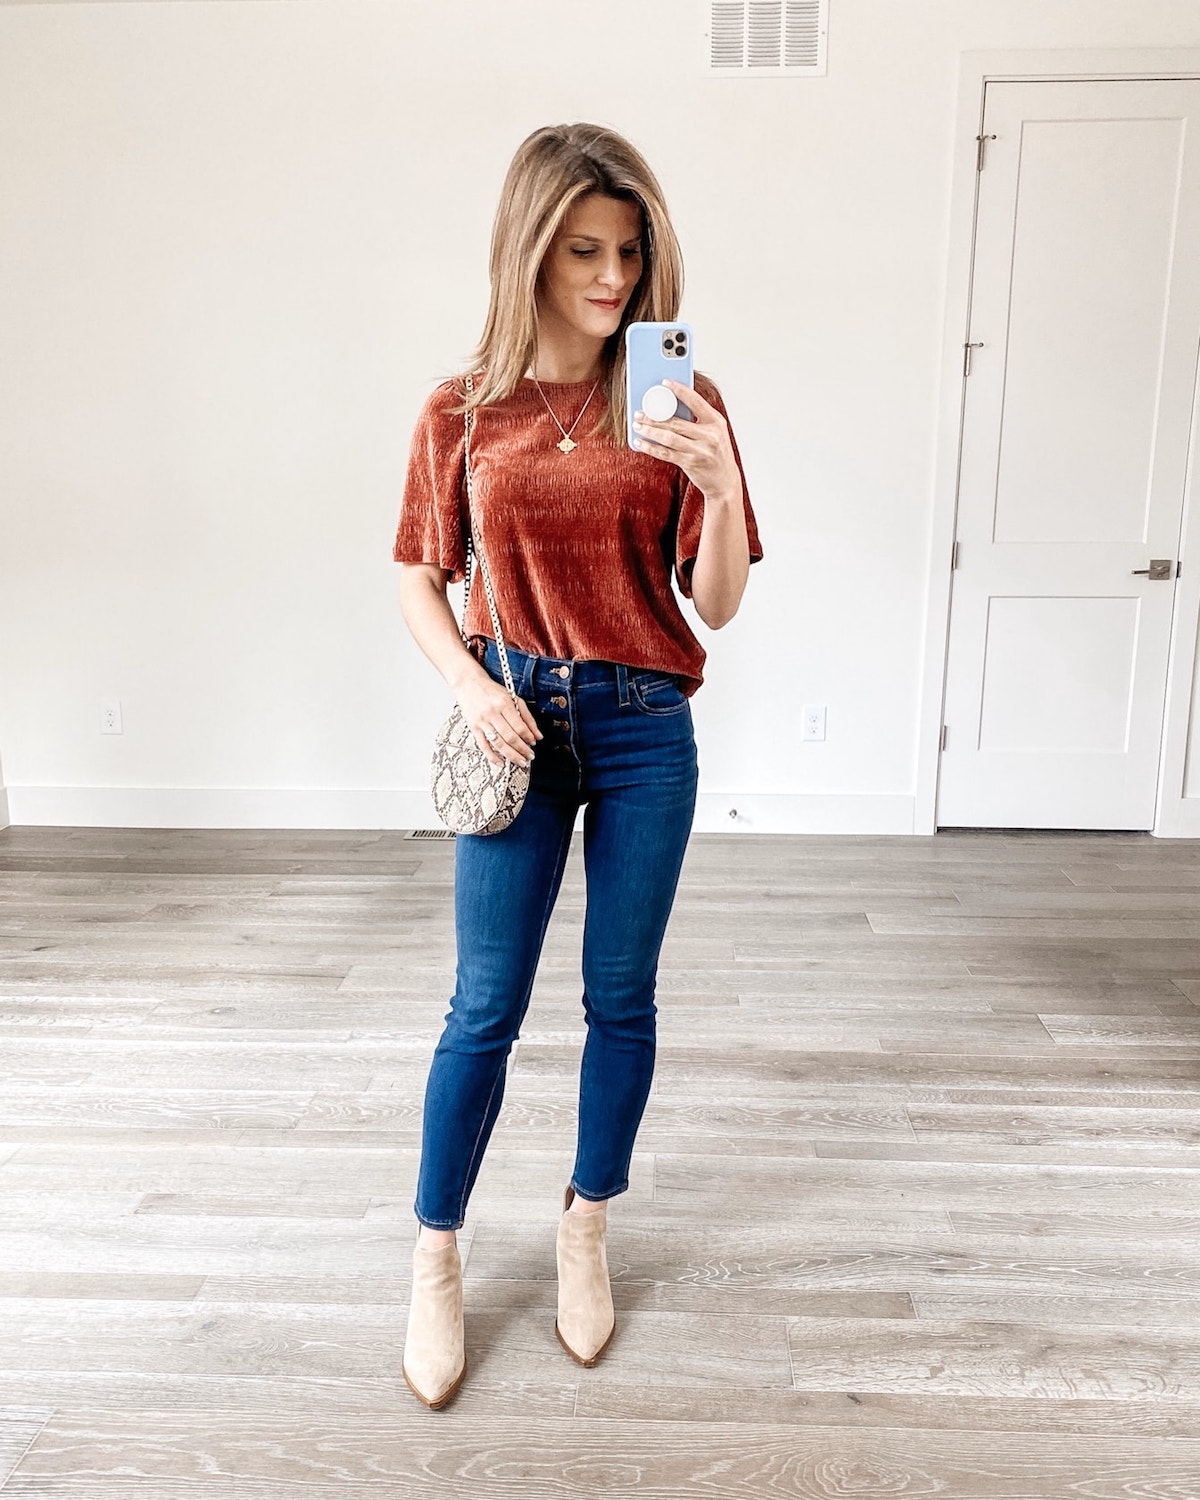 Brighton Keller wearing madewell top and jeans